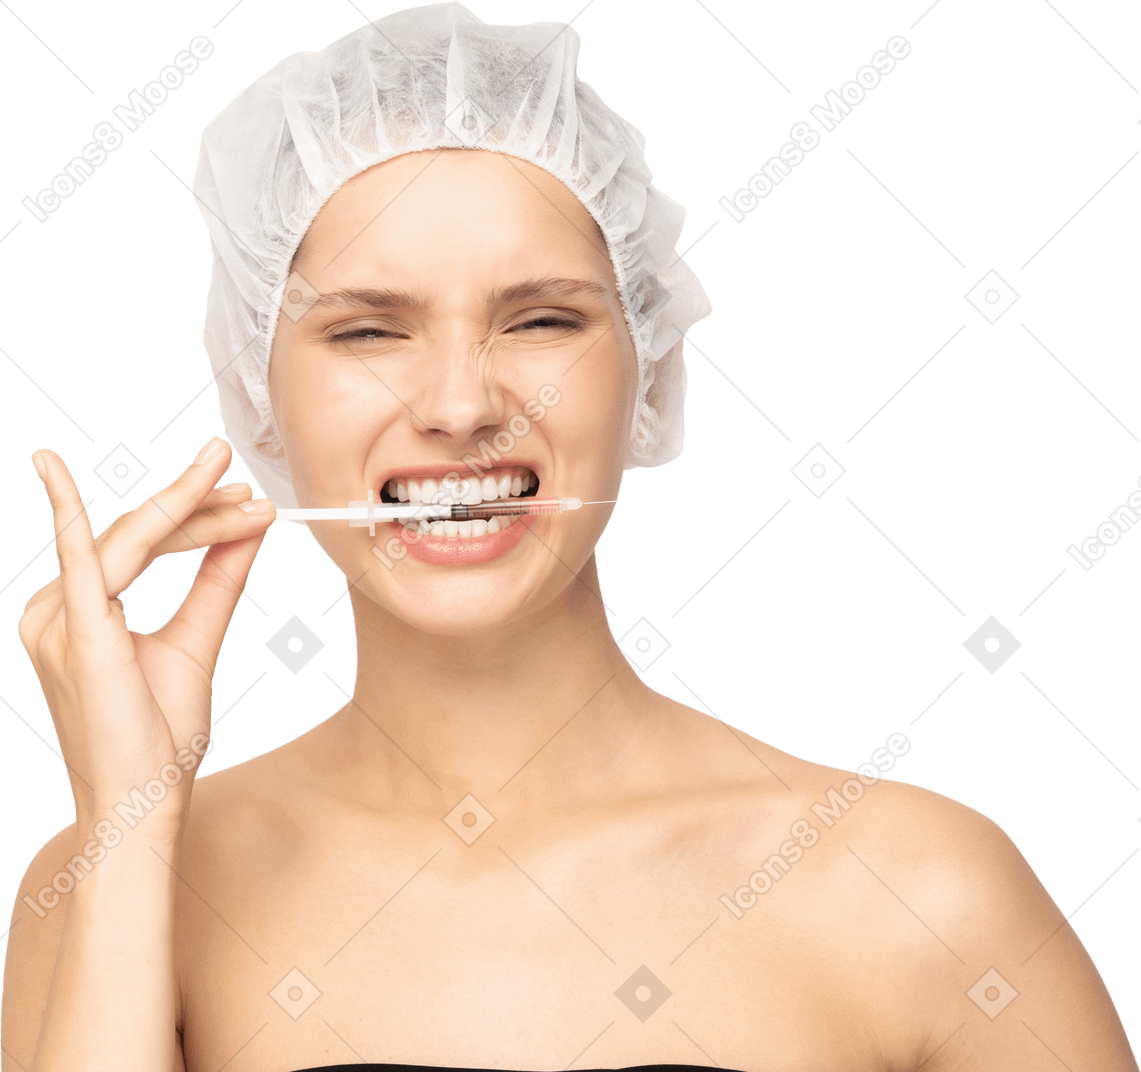 Woman holding syringe with her teeth